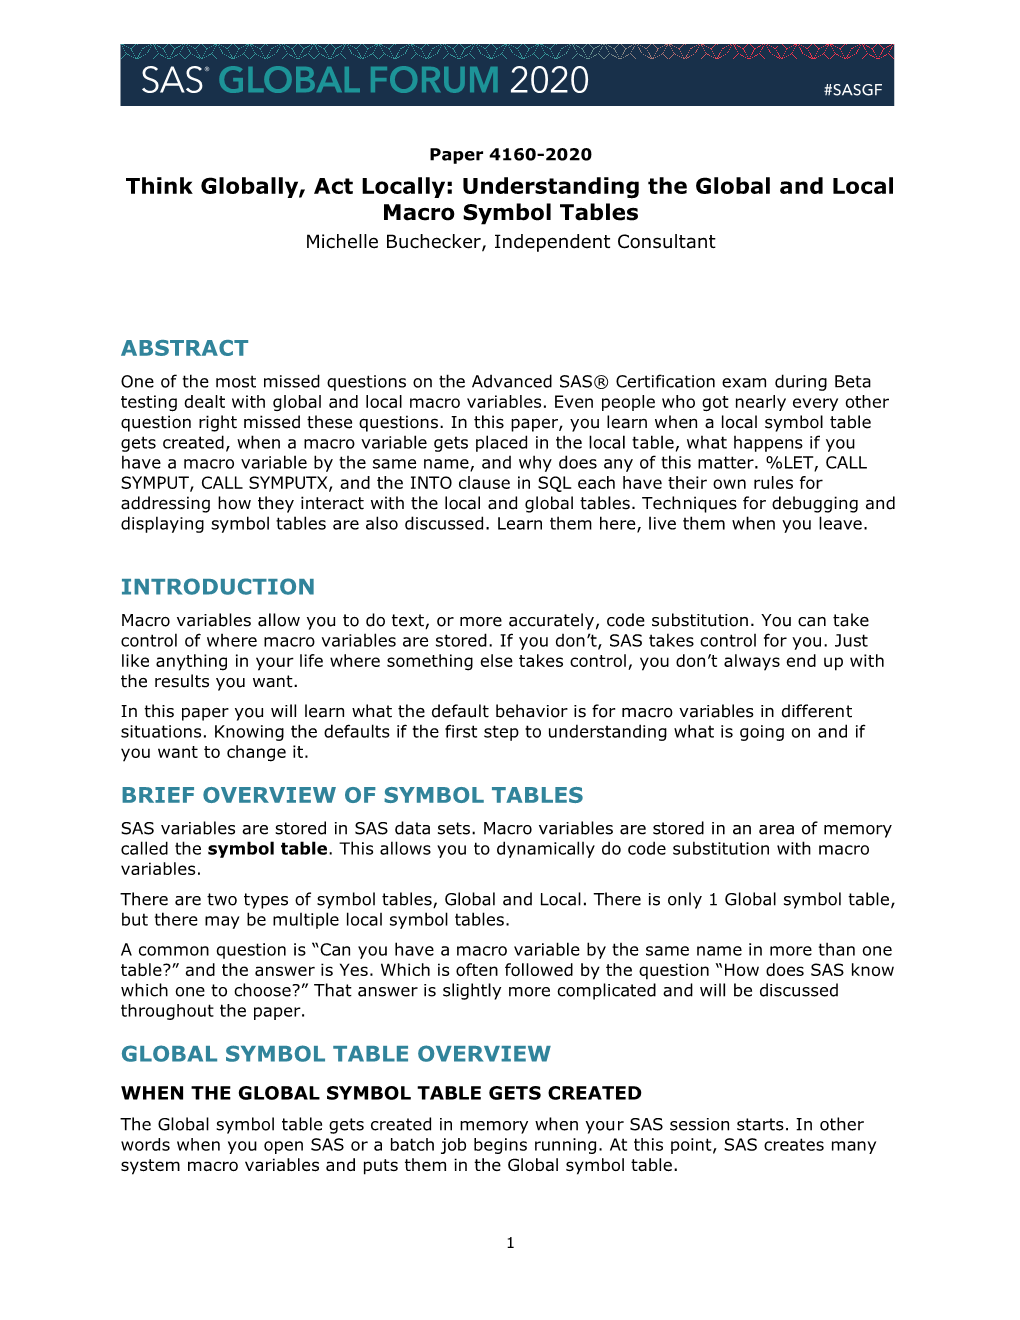 Understanding the Global and Local Macro Symbol Tables Michelle Buchecker, Independent Consultant